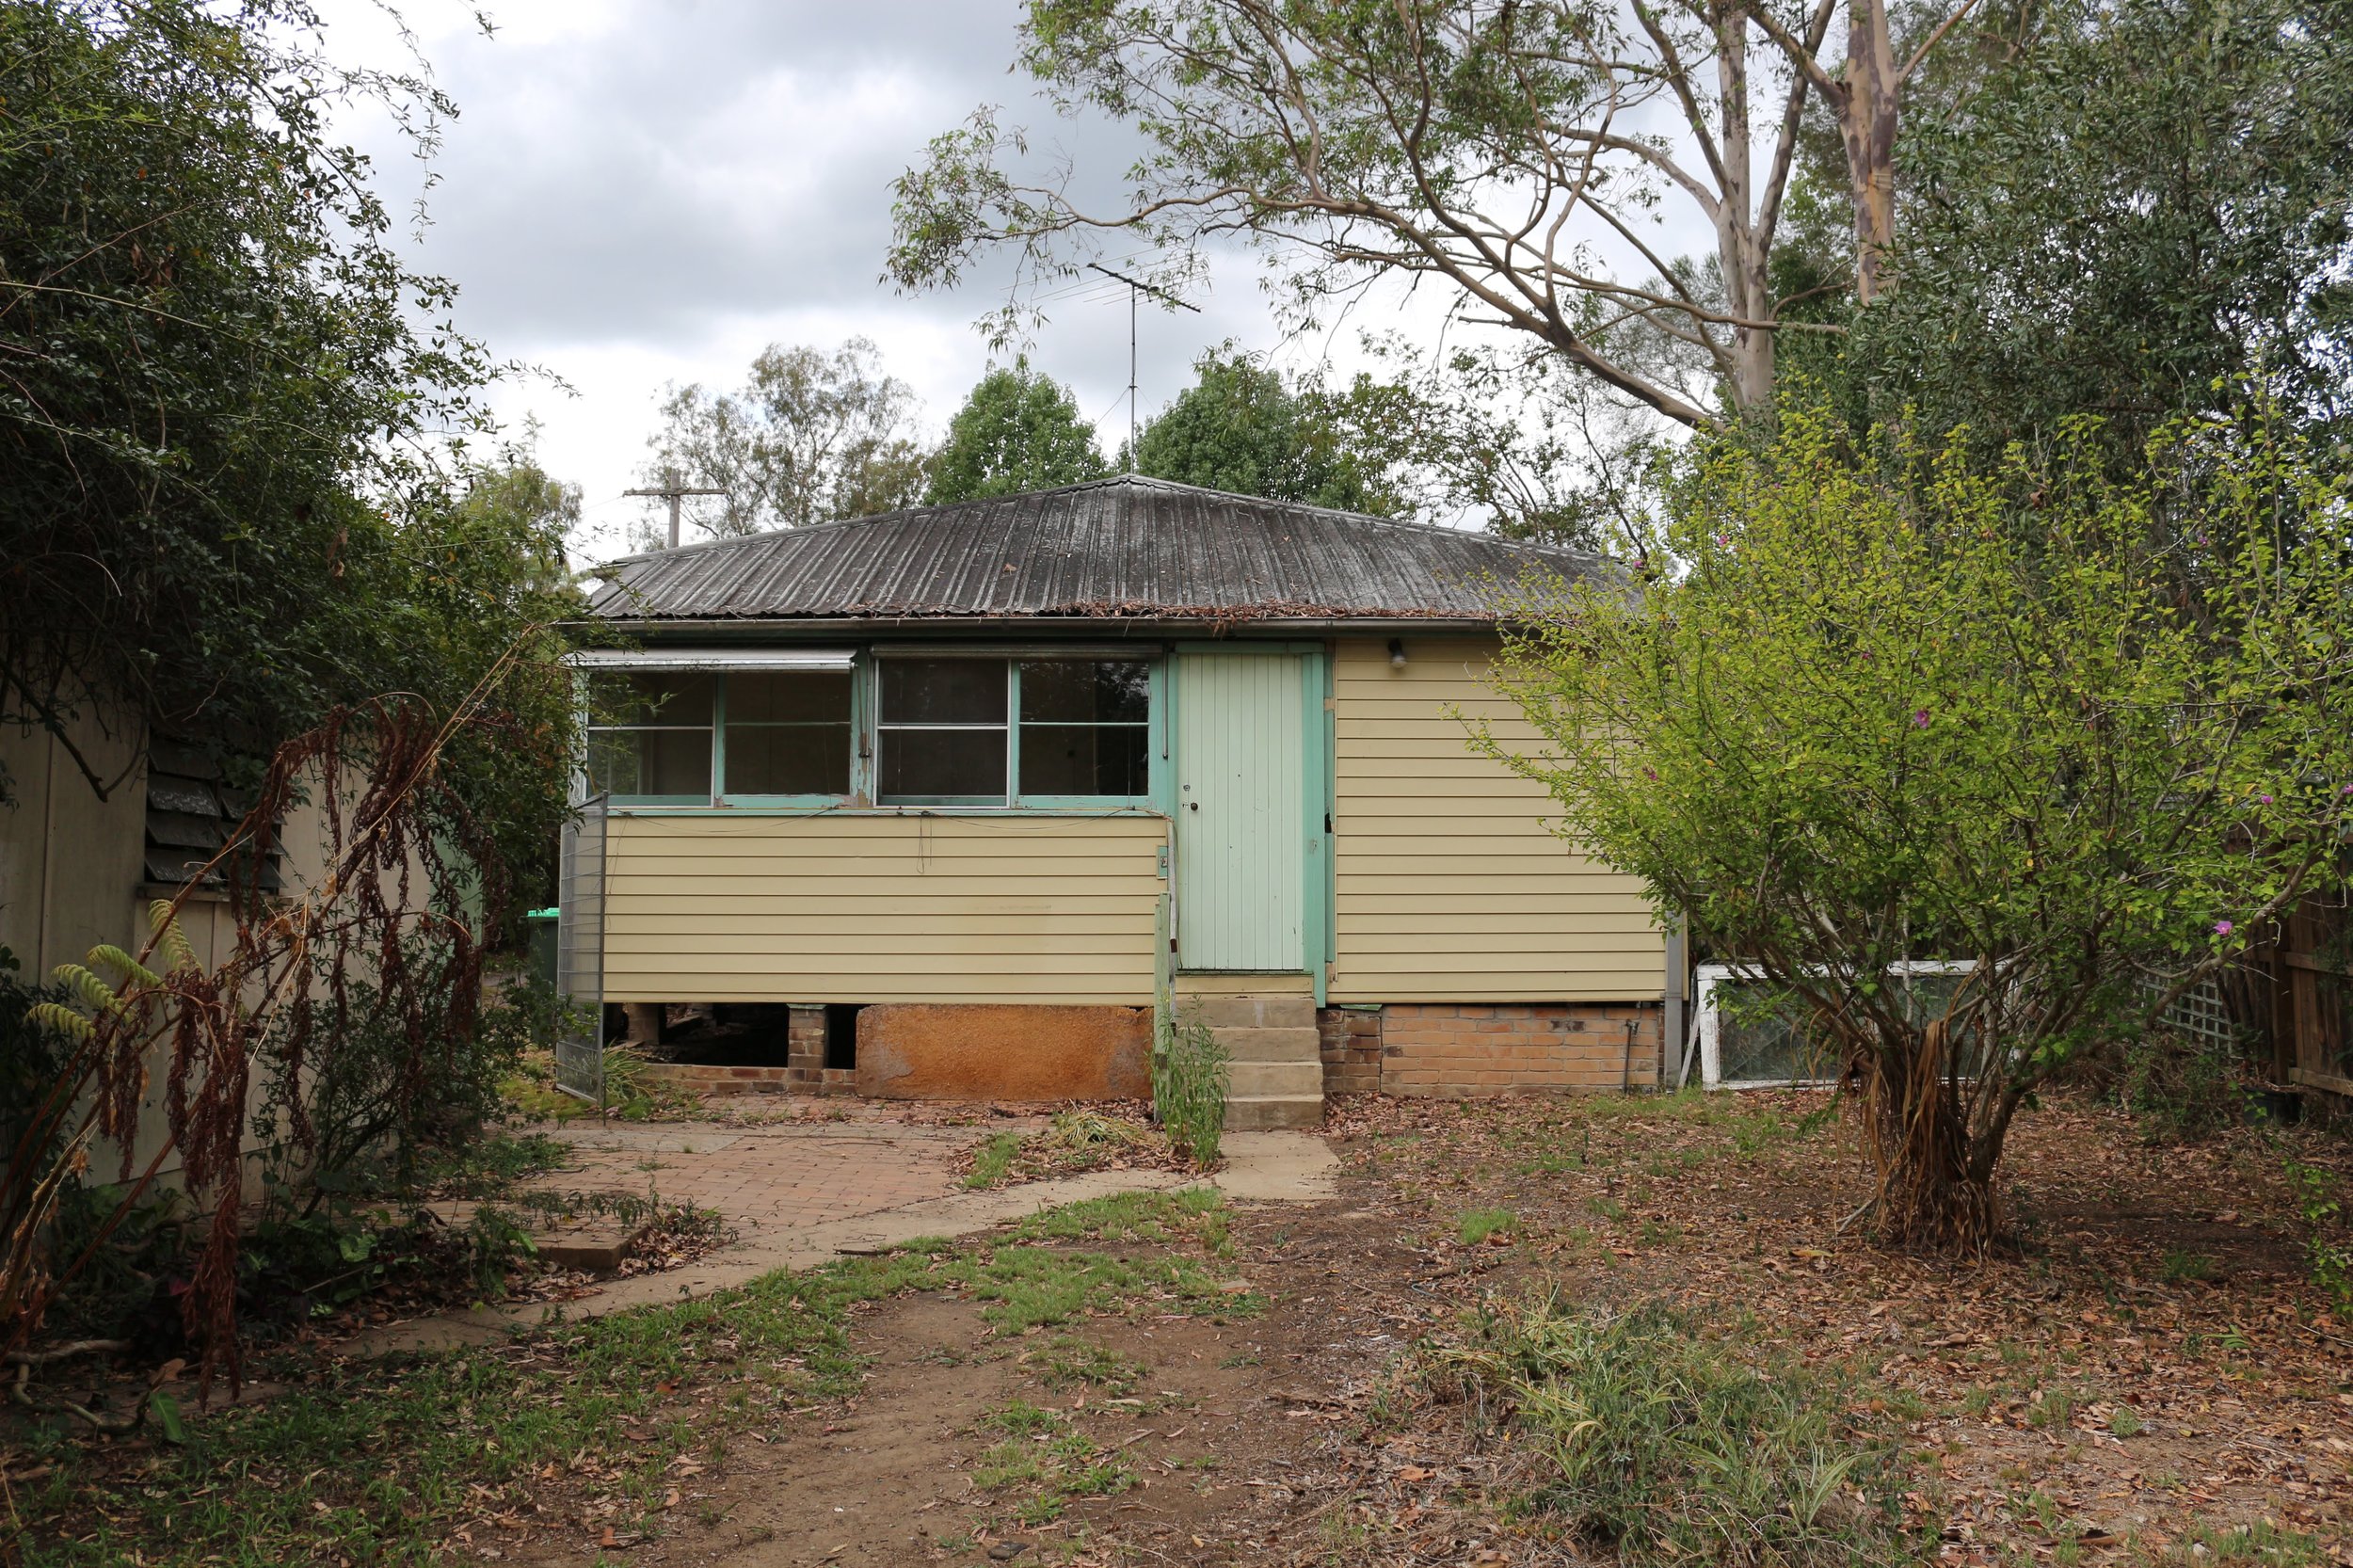 The 'cottage'